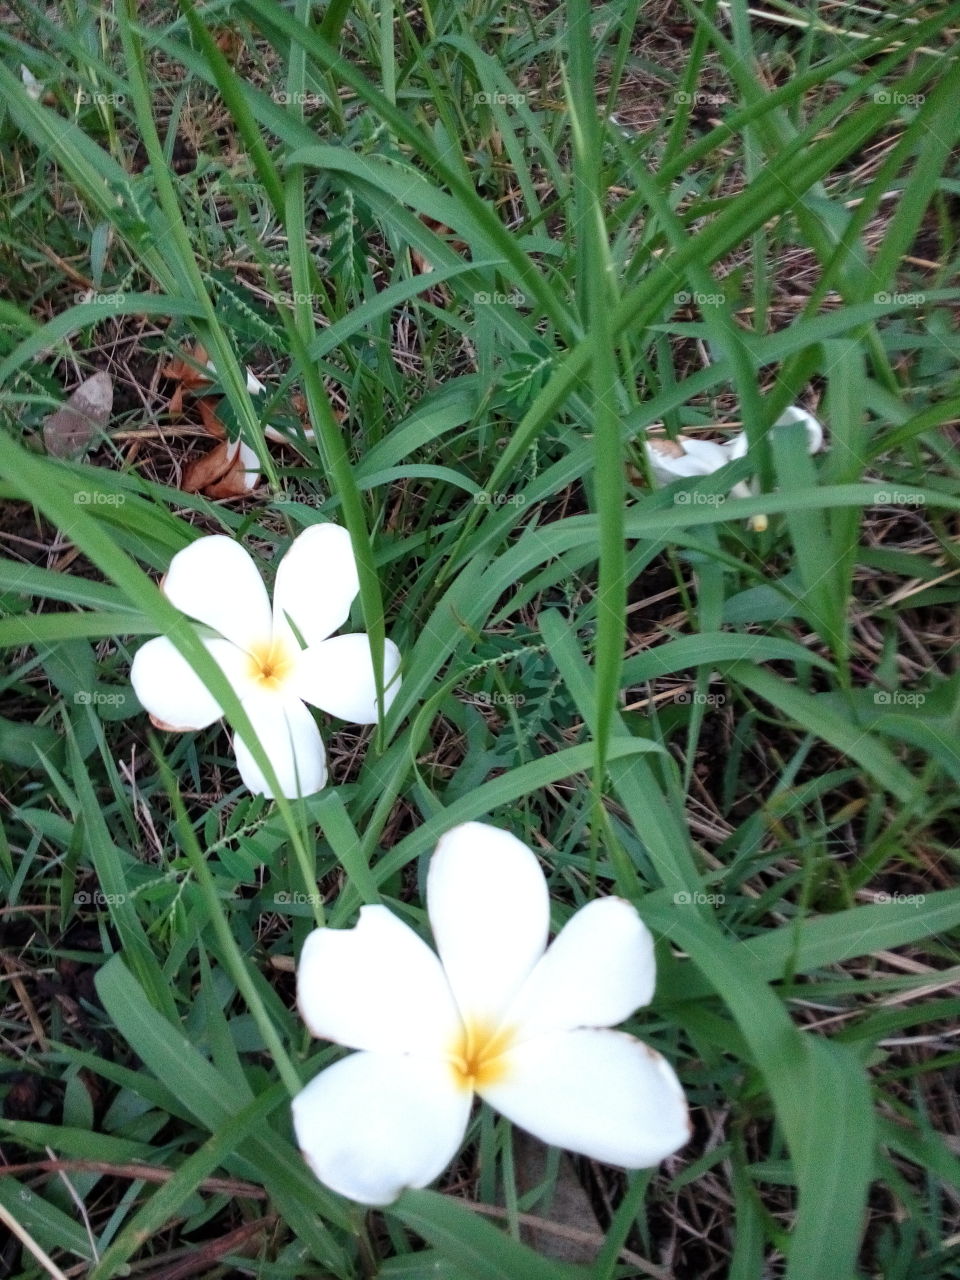 Plumeria and Grass. White flower and Green grass.